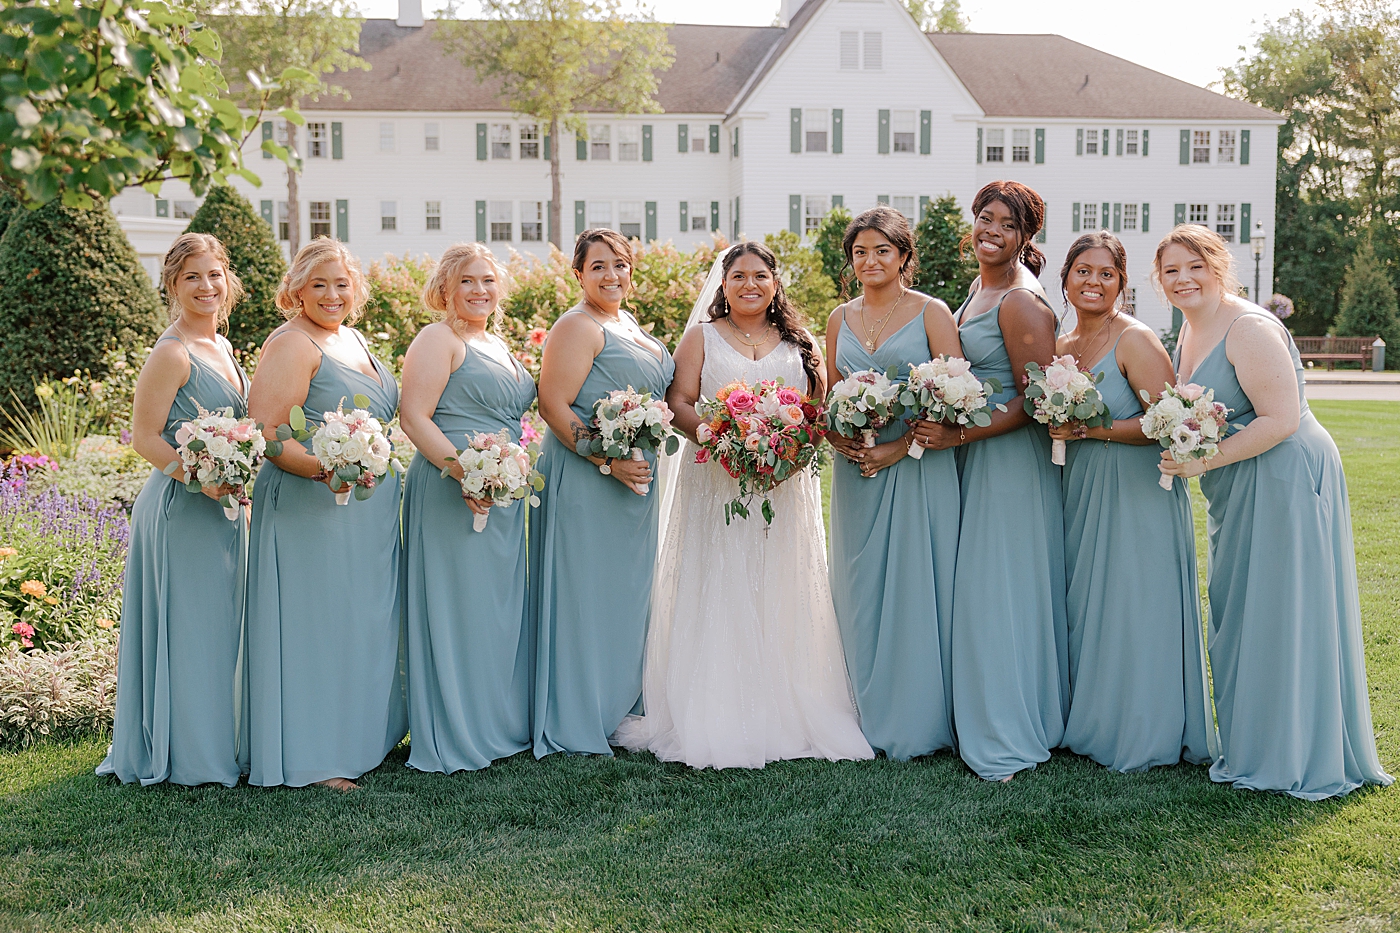 Formal portrait of a bride and her bridesmaids in blue with colorful bouquets | Image by Hope Helmuth Photography